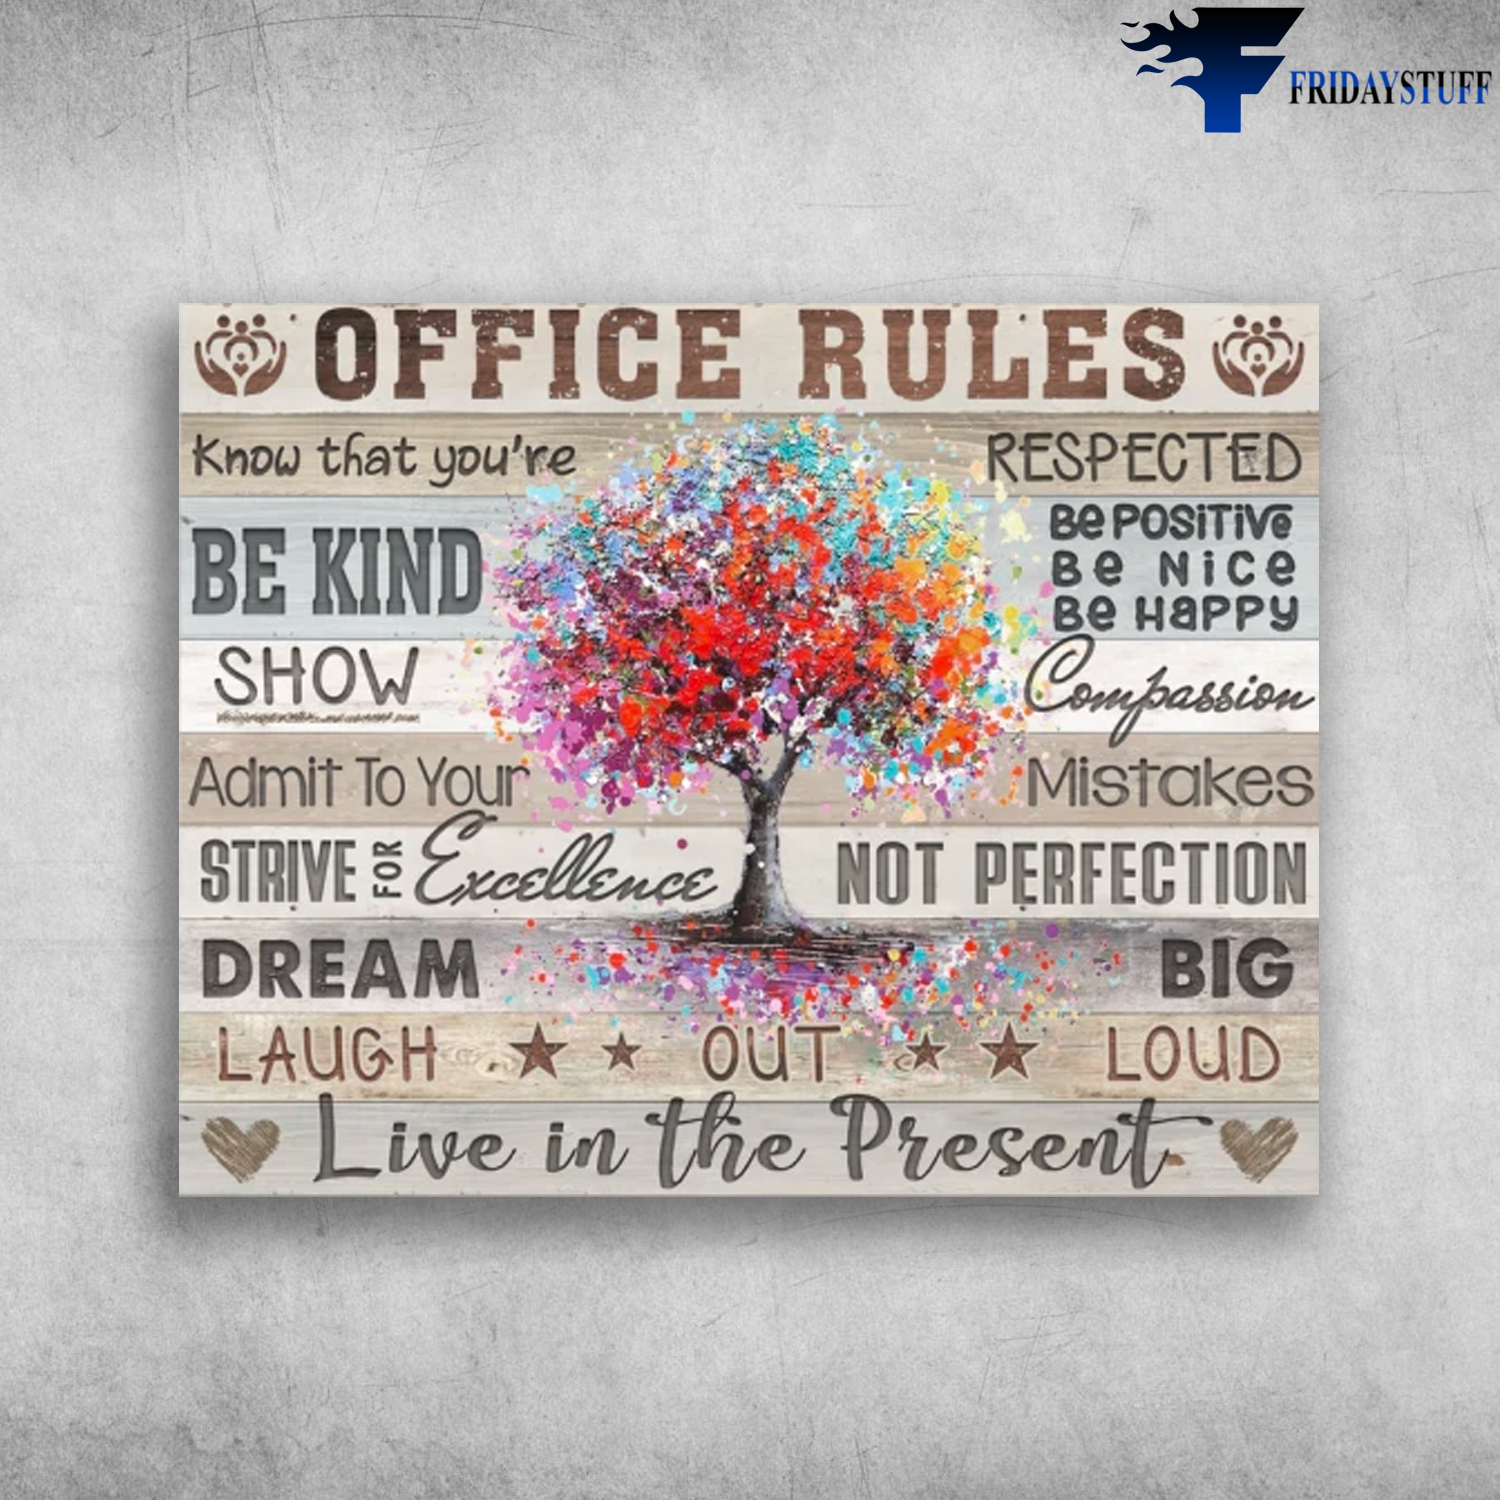 Office Rules Dream Big Laugh Out Loud Live In The Present